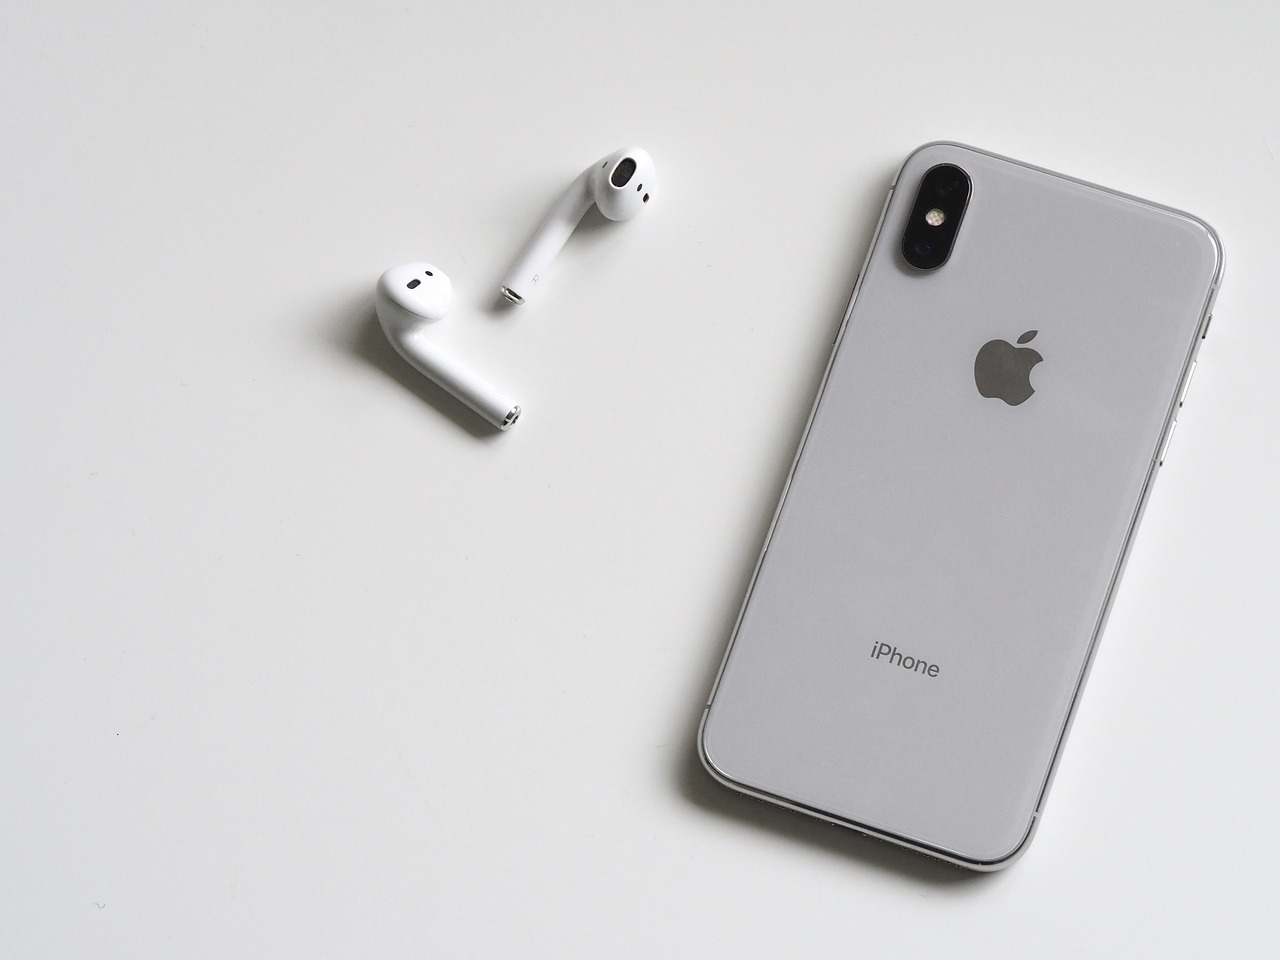 iPhone X, airpods